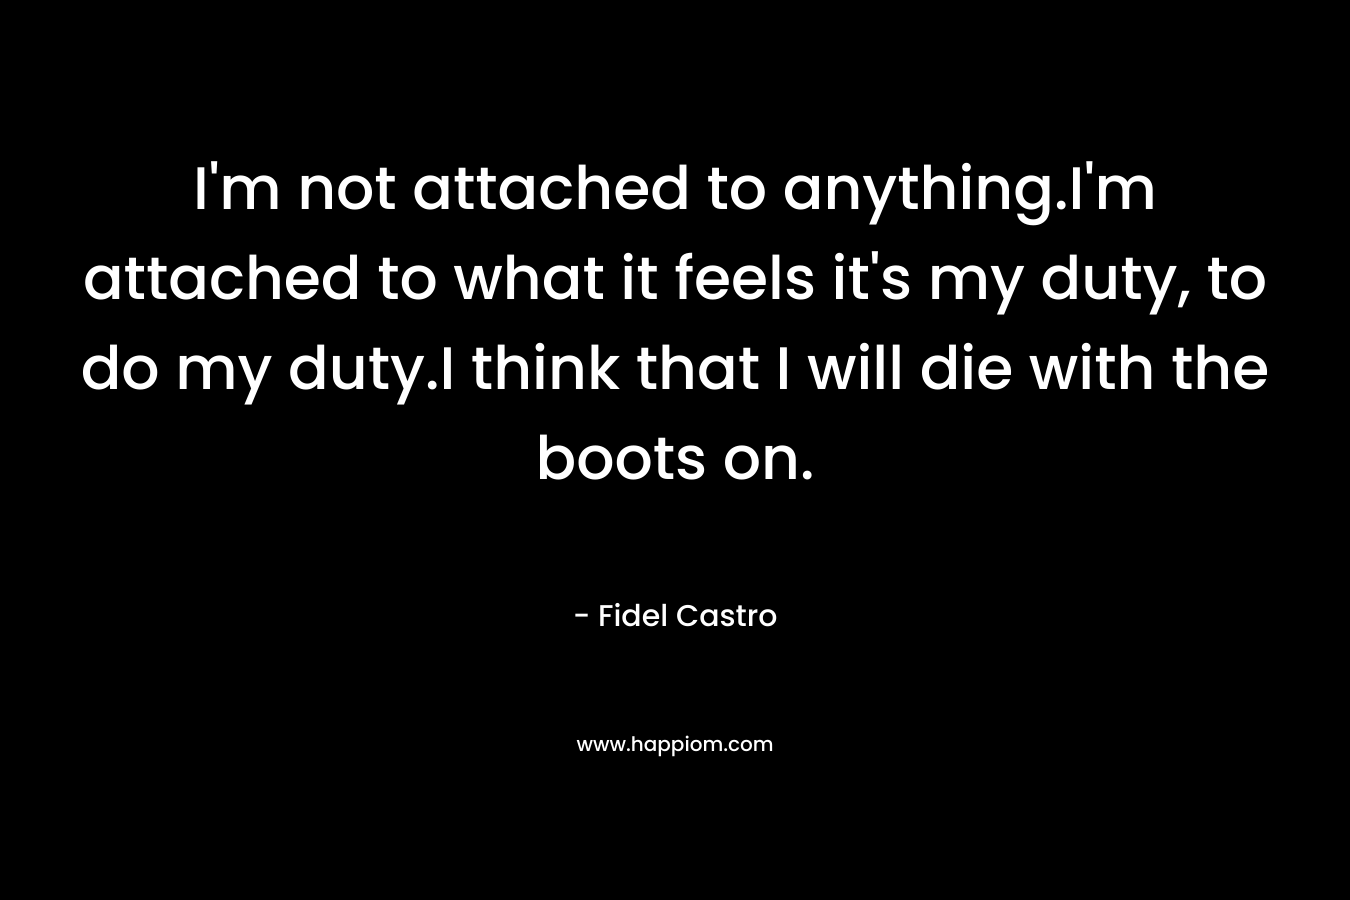 I'm not attached to anything.I'm attached to what it feels it's my duty, to do my duty.I think that I will die with the boots on.